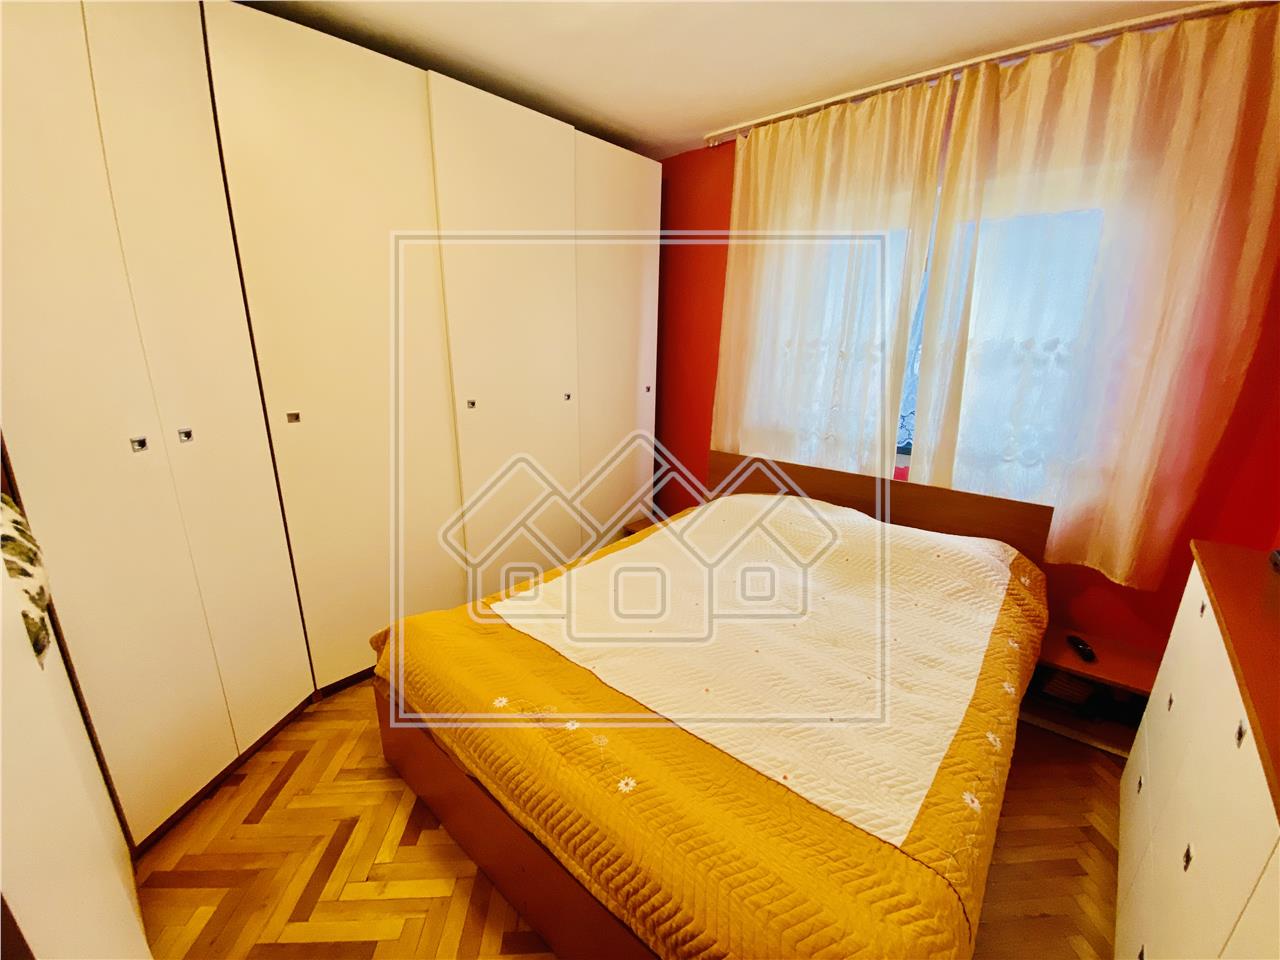 Apartment for sale in Sibiu - 3 rooms - 2 balconies - Swimming School